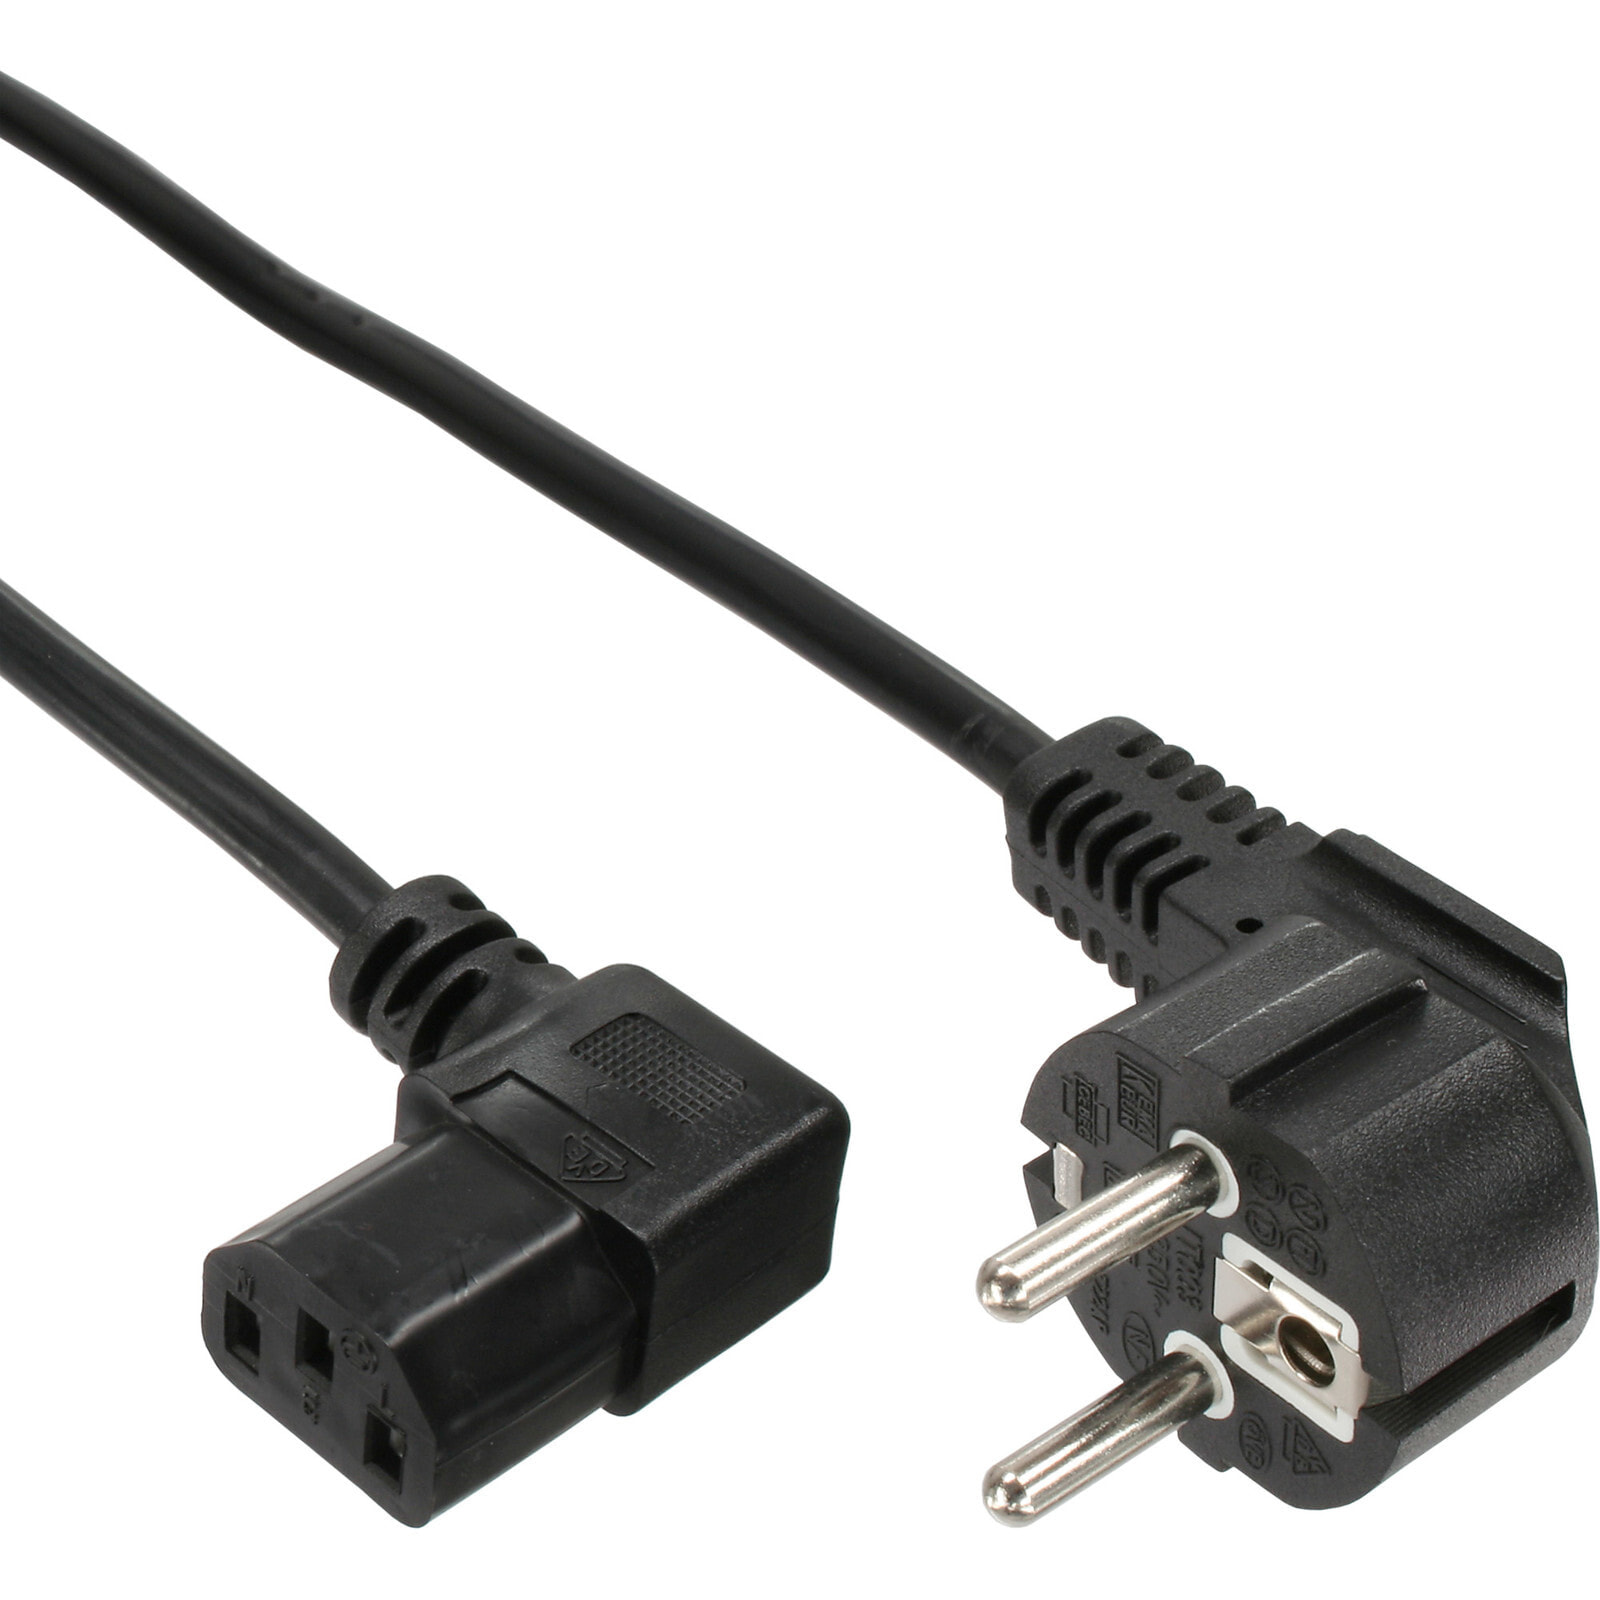 InLine 35pcs. Bulk-Pack Power Cable Type F angled C13 right angled black 1.8m - 1.8 m - Power plug type F - IEC C13